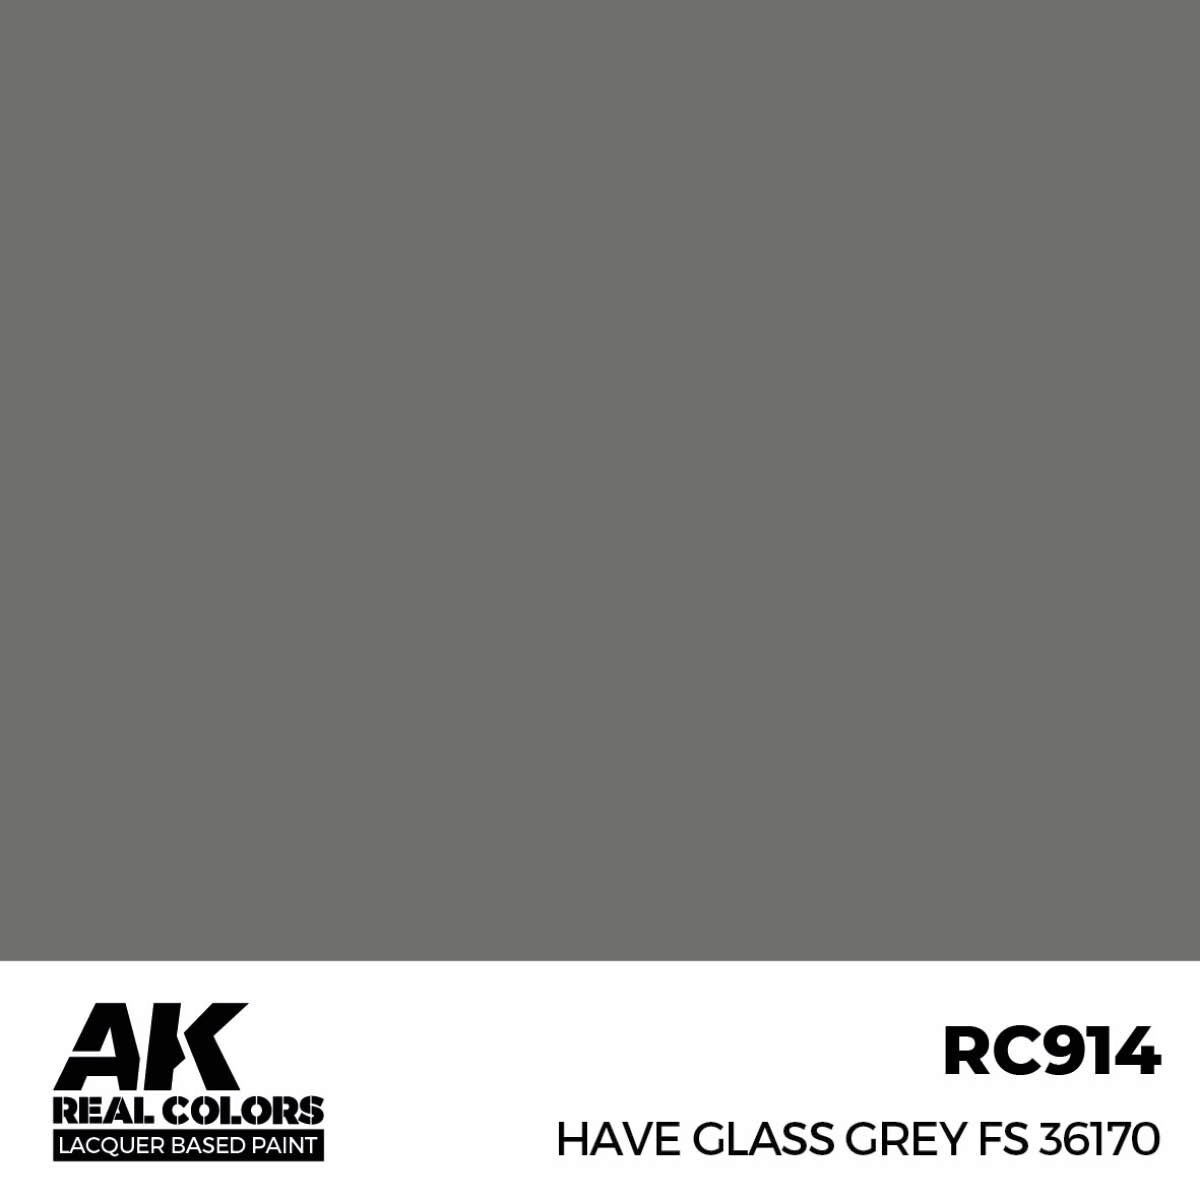 AK RC914 Real Colors Have Glass Grey FS 36170 17 ml.